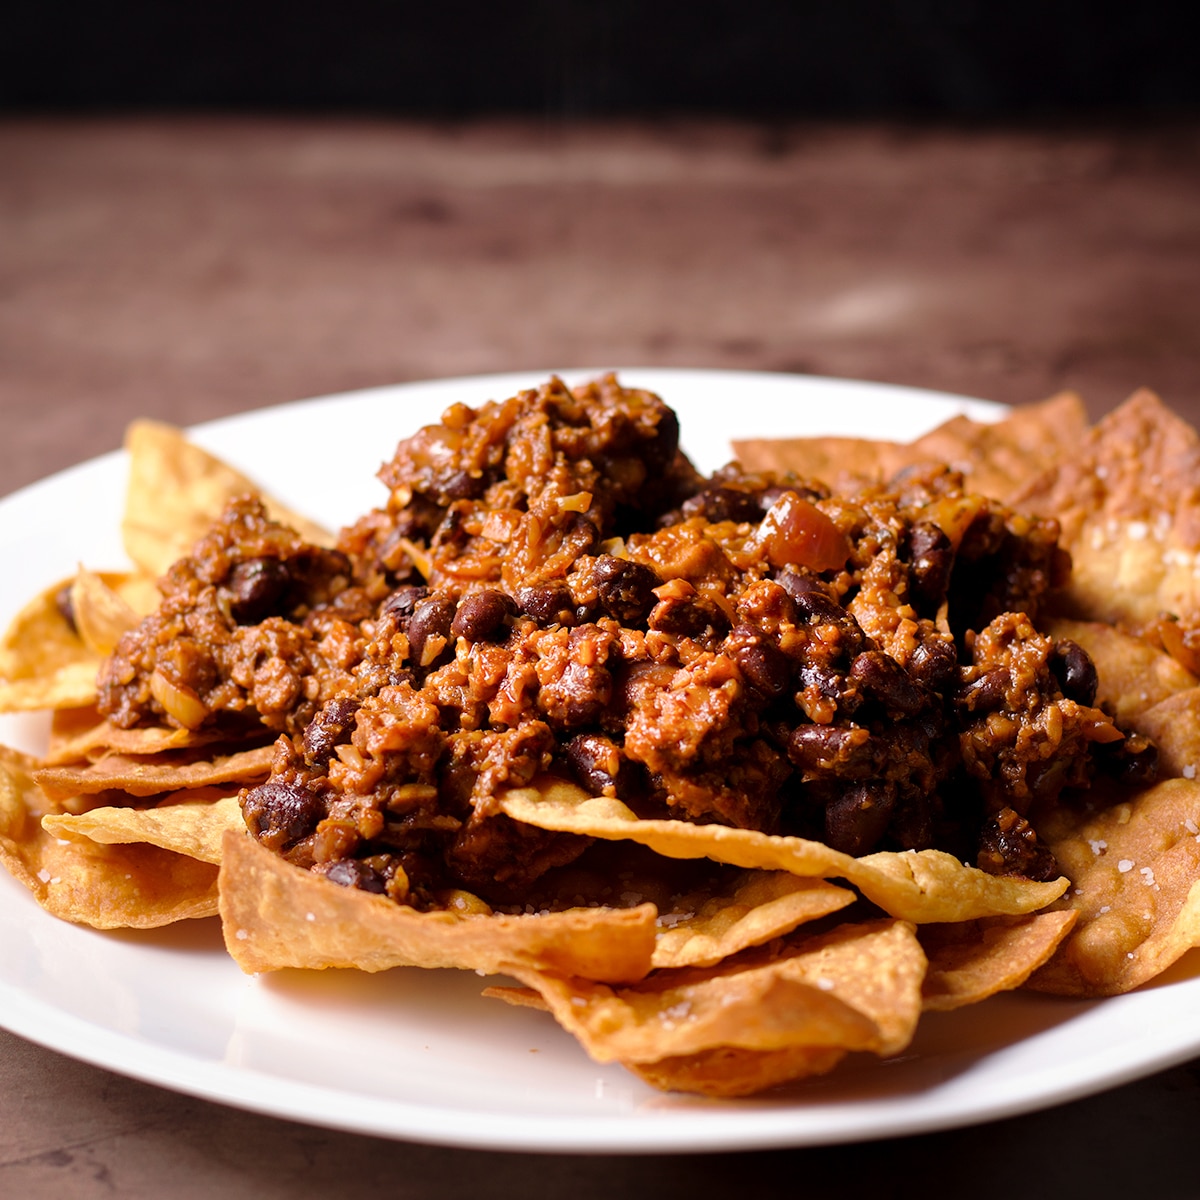 A plate of tortilla chips topped with vegan taco meat.